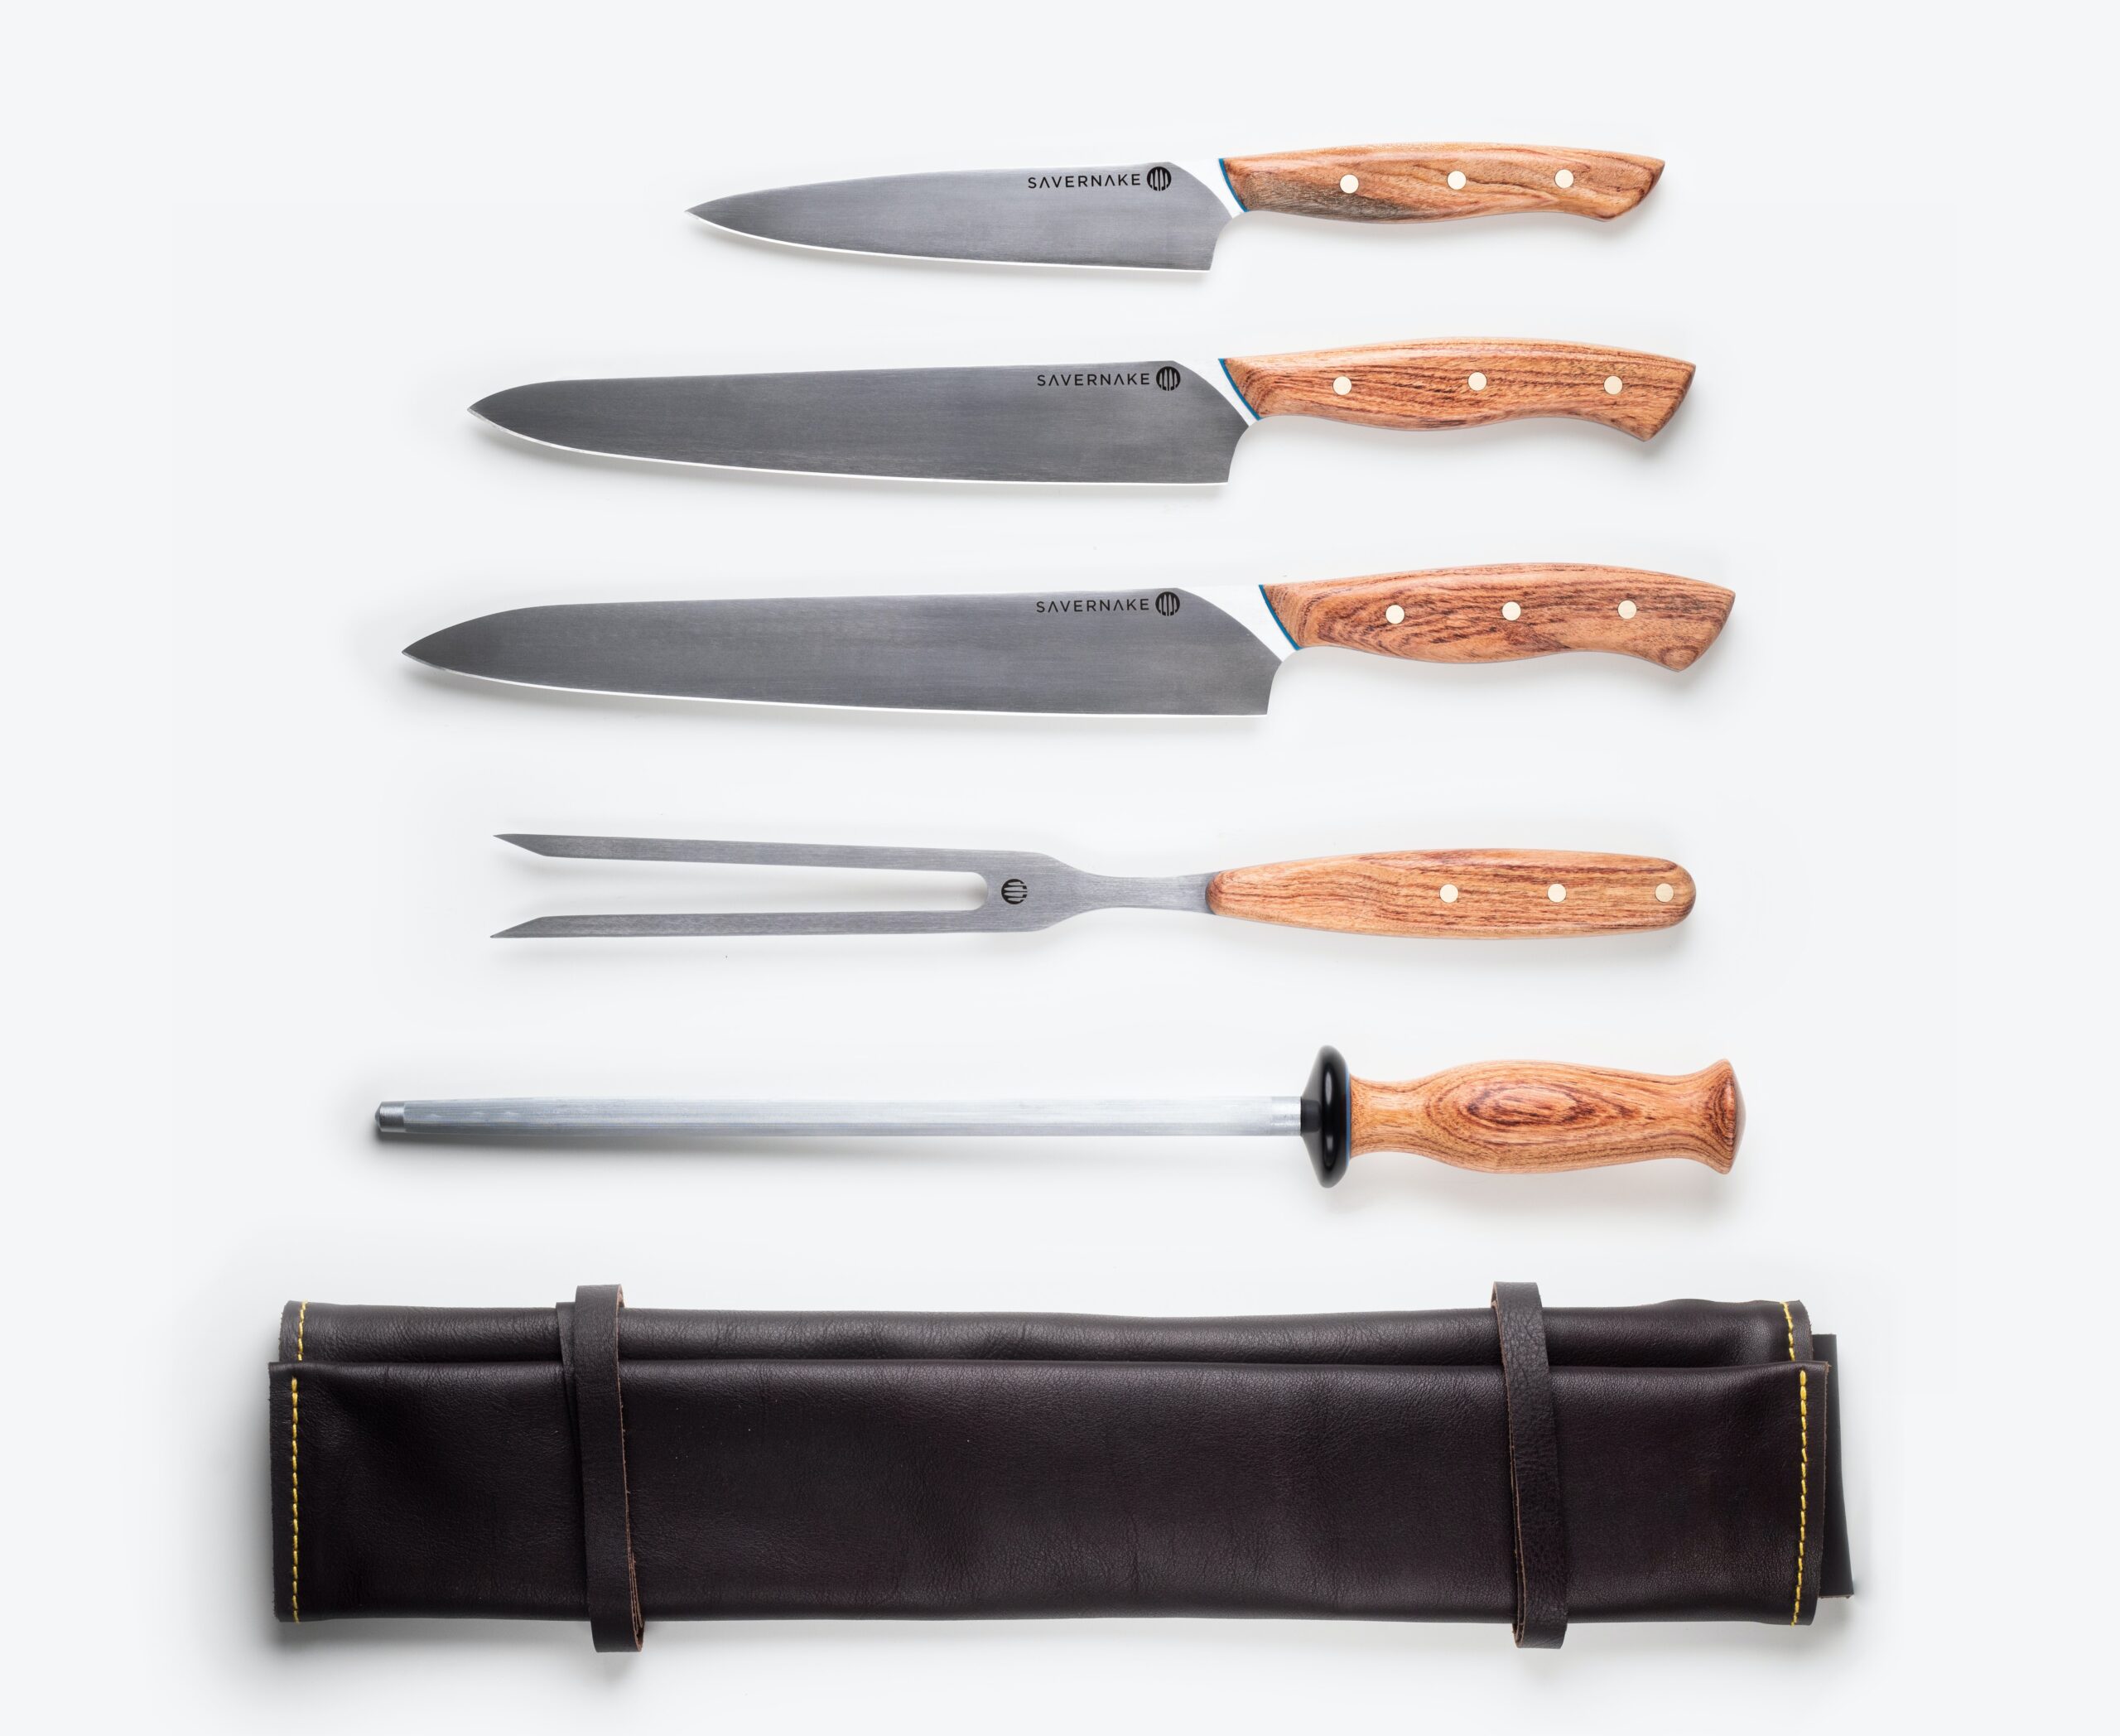 Astercook Knives  For Home Chef and Professional